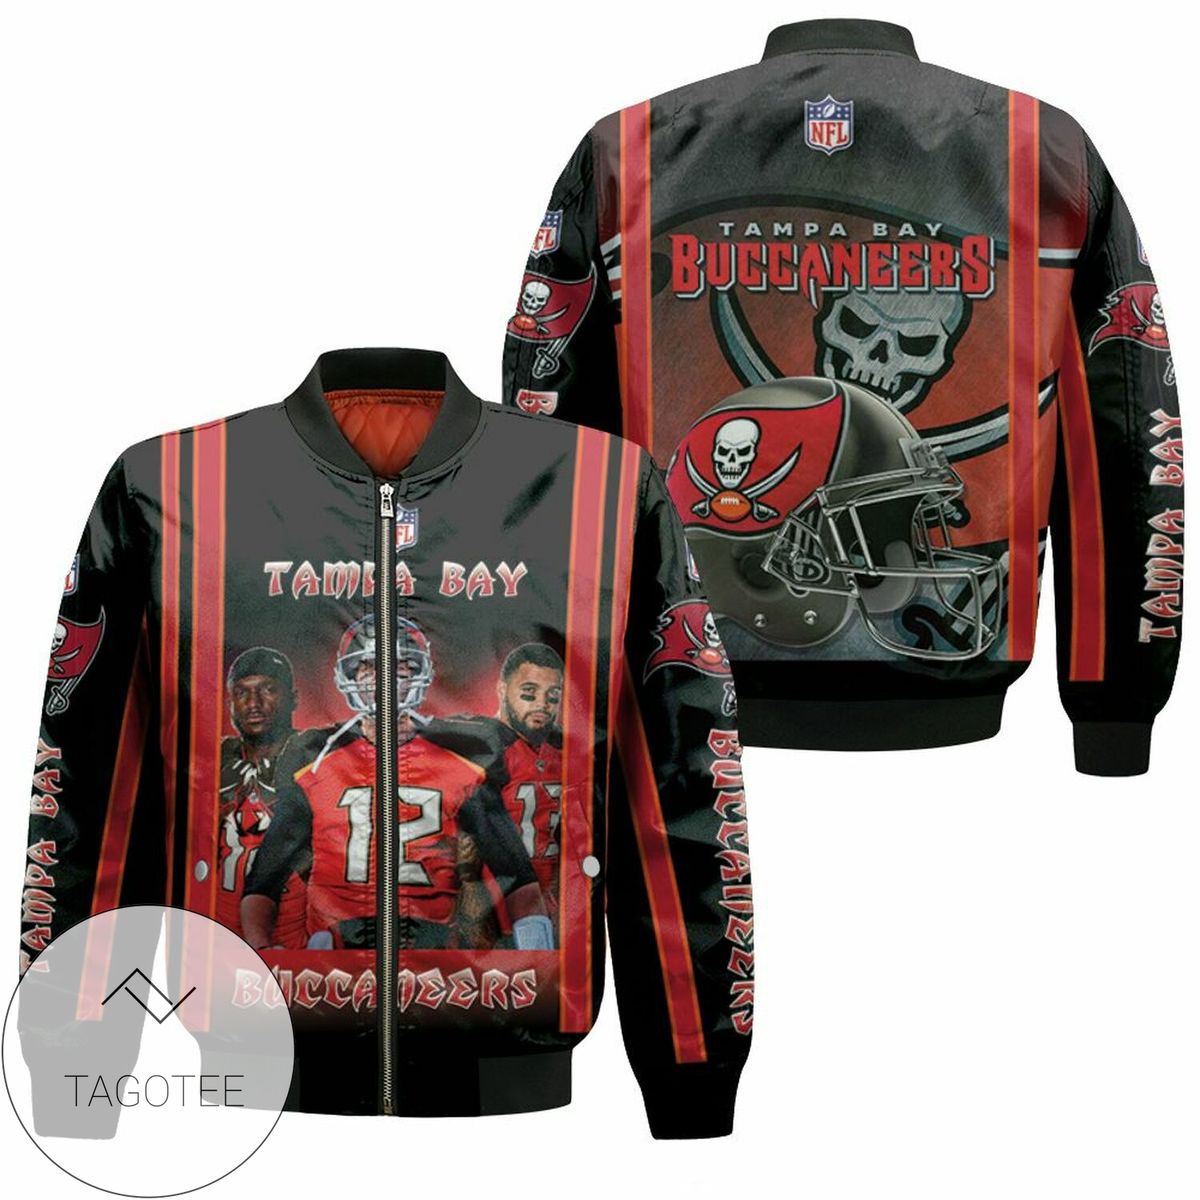 Tampa Bay Buccaneers 2021 Super Bowl Nfc South Division Champions Bomber Jacket